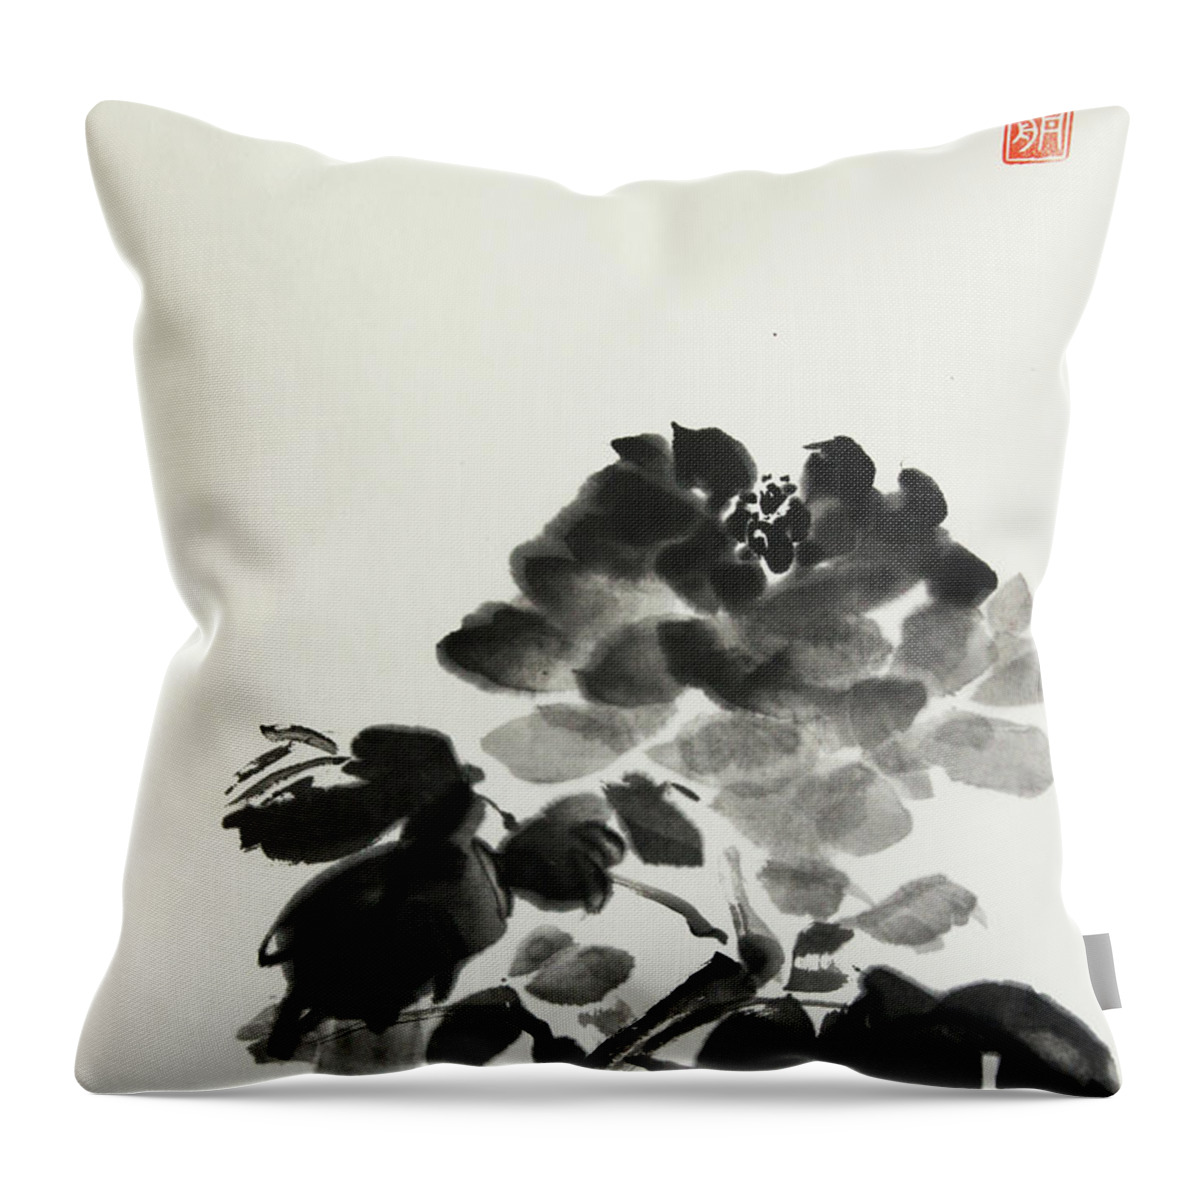 Rose Throw Pillow featuring the painting A Rose That Blooms by Nadja Van Ghelue